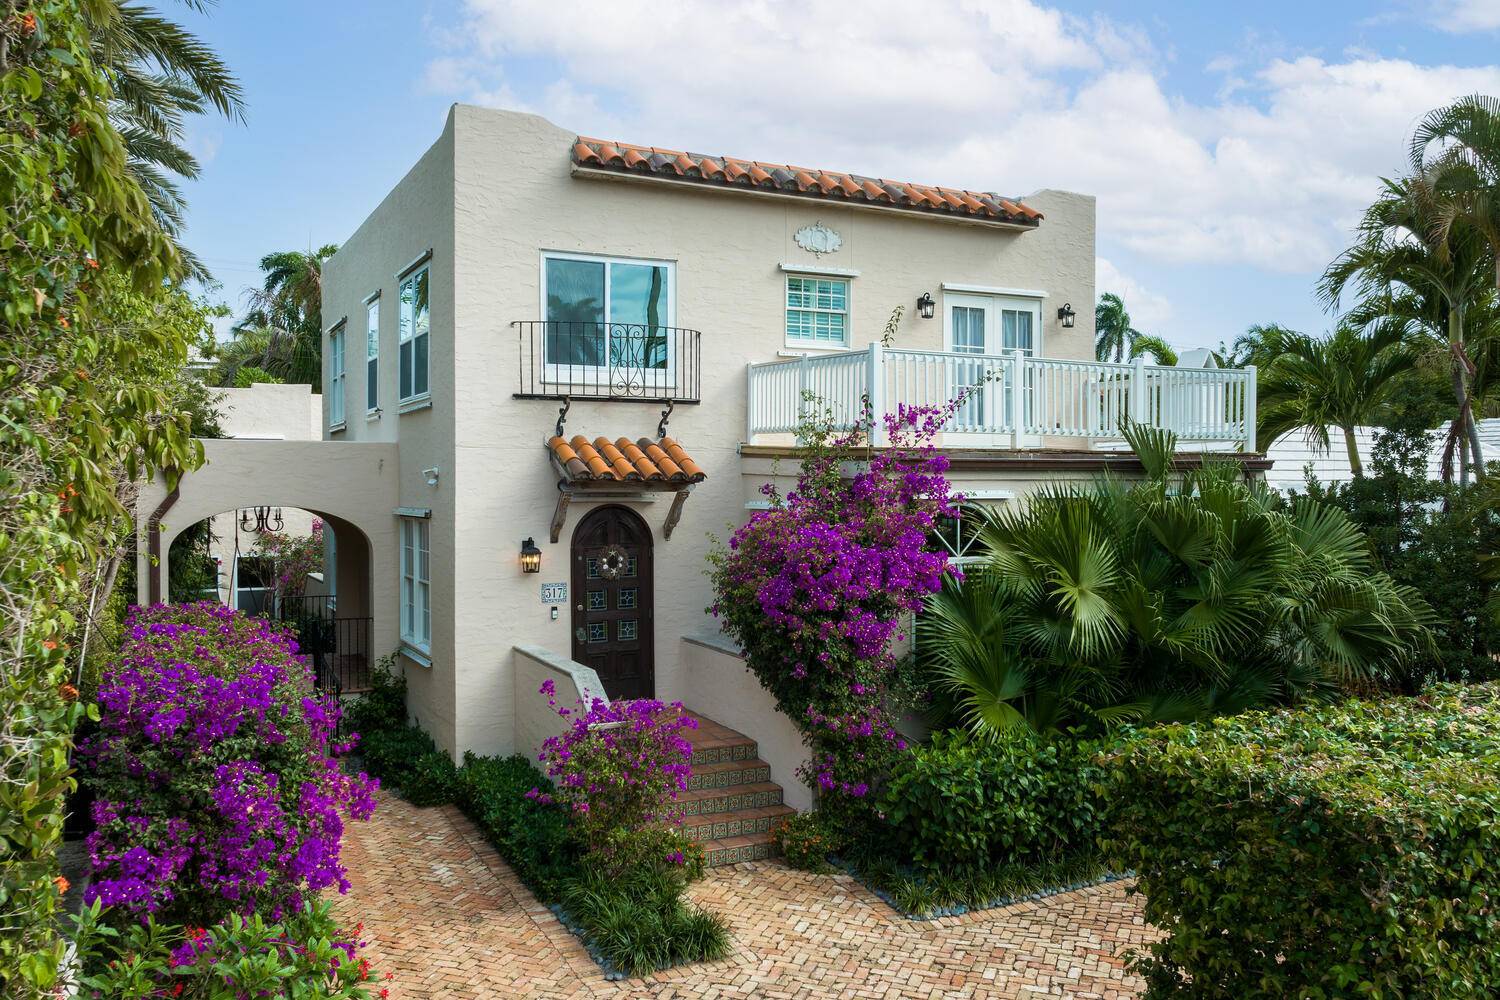 Exuding Mediterranean inspiration elegance and charm, this six bedroom in town home with separate two bedroom guest cottage creates a rare opportunity.